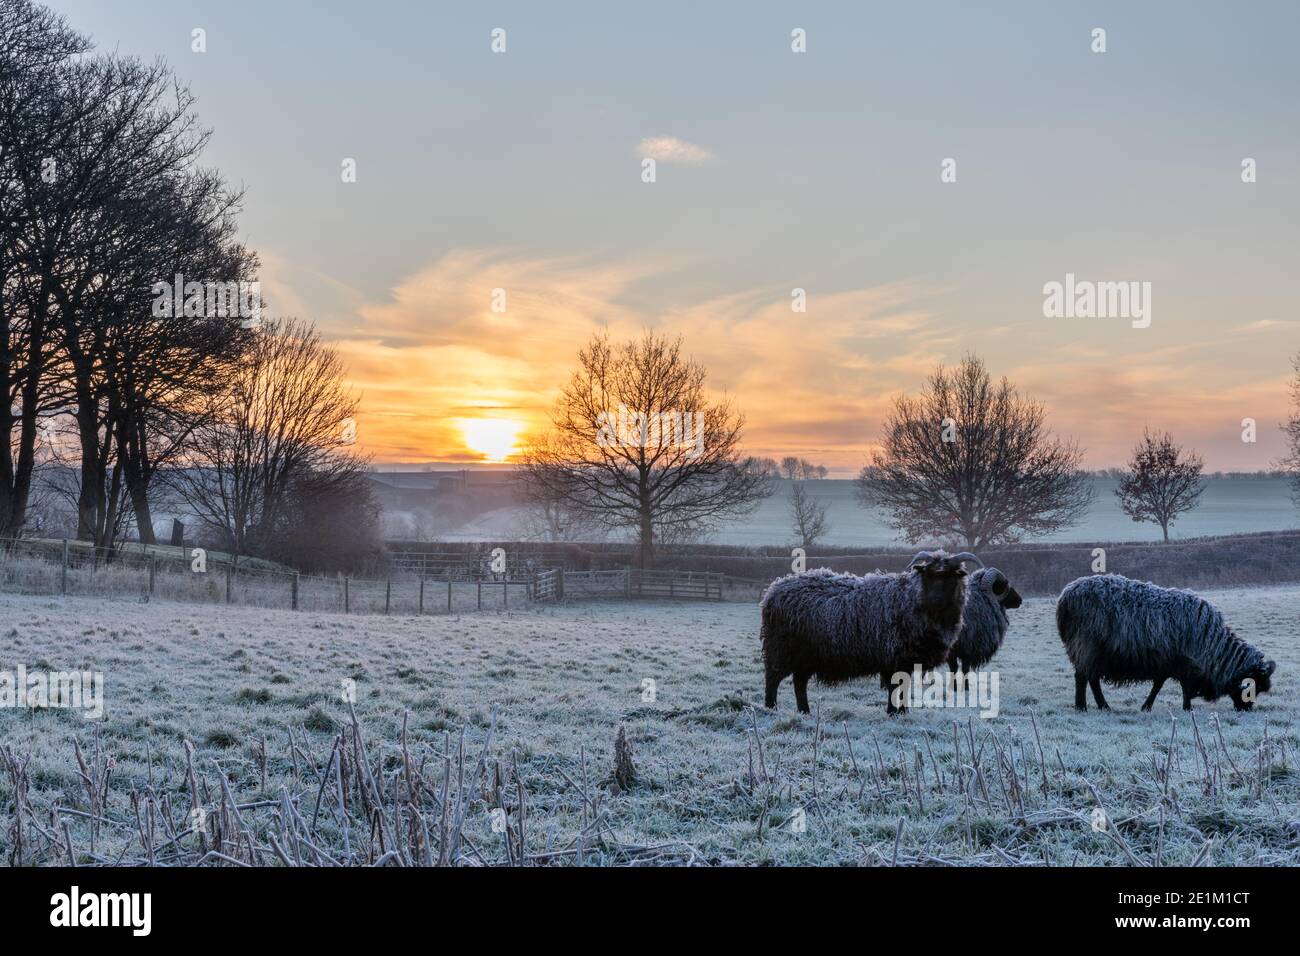 Sunset in Garthorpe with Hebridean sheep in a frosty pasture, Leicestershire, England, United Kingdom Stock Photo